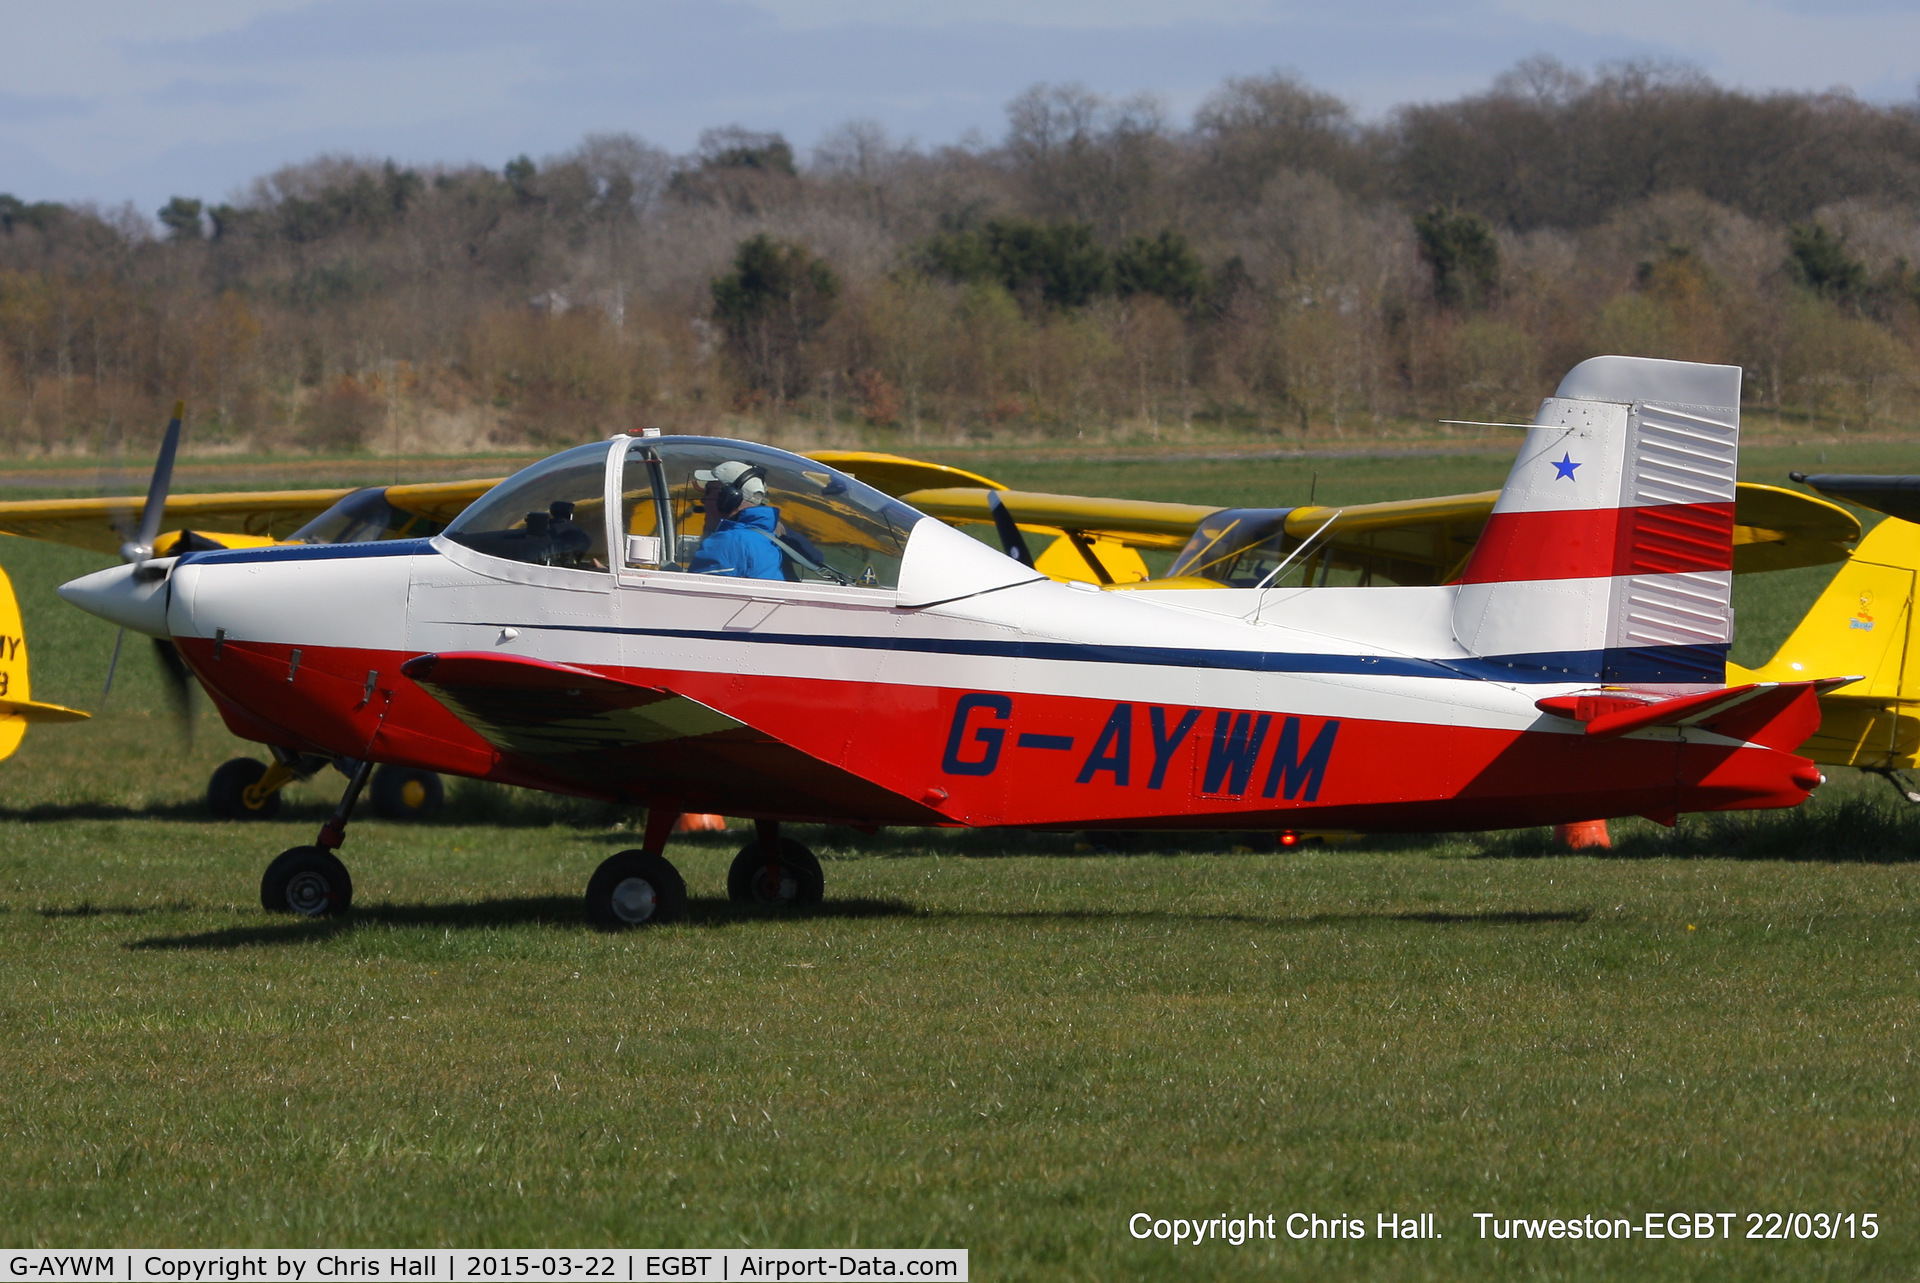 G-AYWM, 1971 AESL Glos-Airtourer Super 150/T6 C/N A534, at the Vintage Aircraft Club spring rally